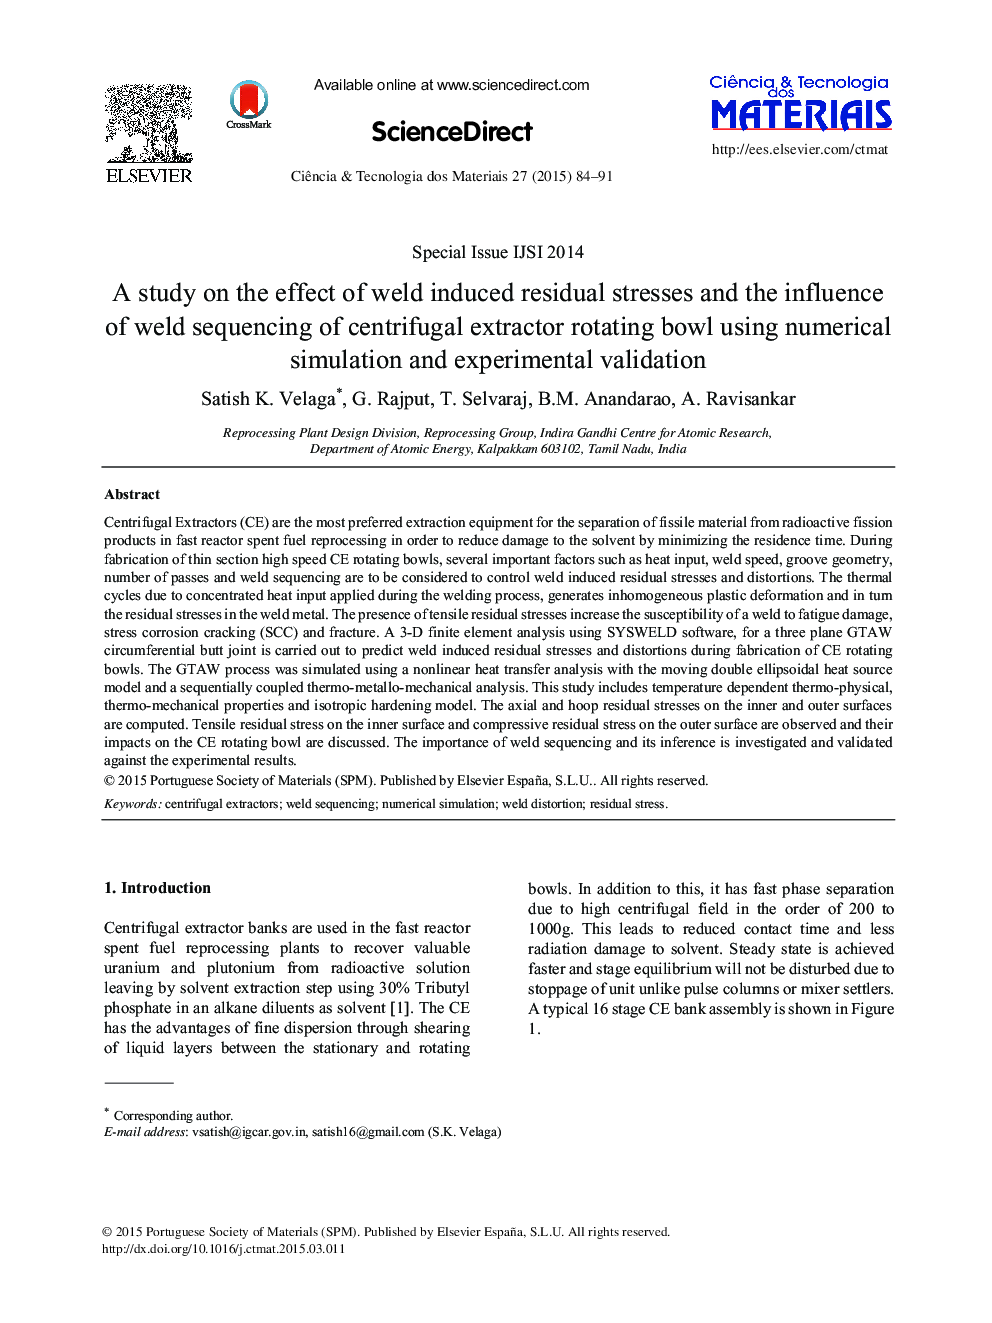 A study on the effect of weld induced residual stresses and the influence of weld sequencing of centrifugal extractor rotating bowl using numerical simulation and experimental validation